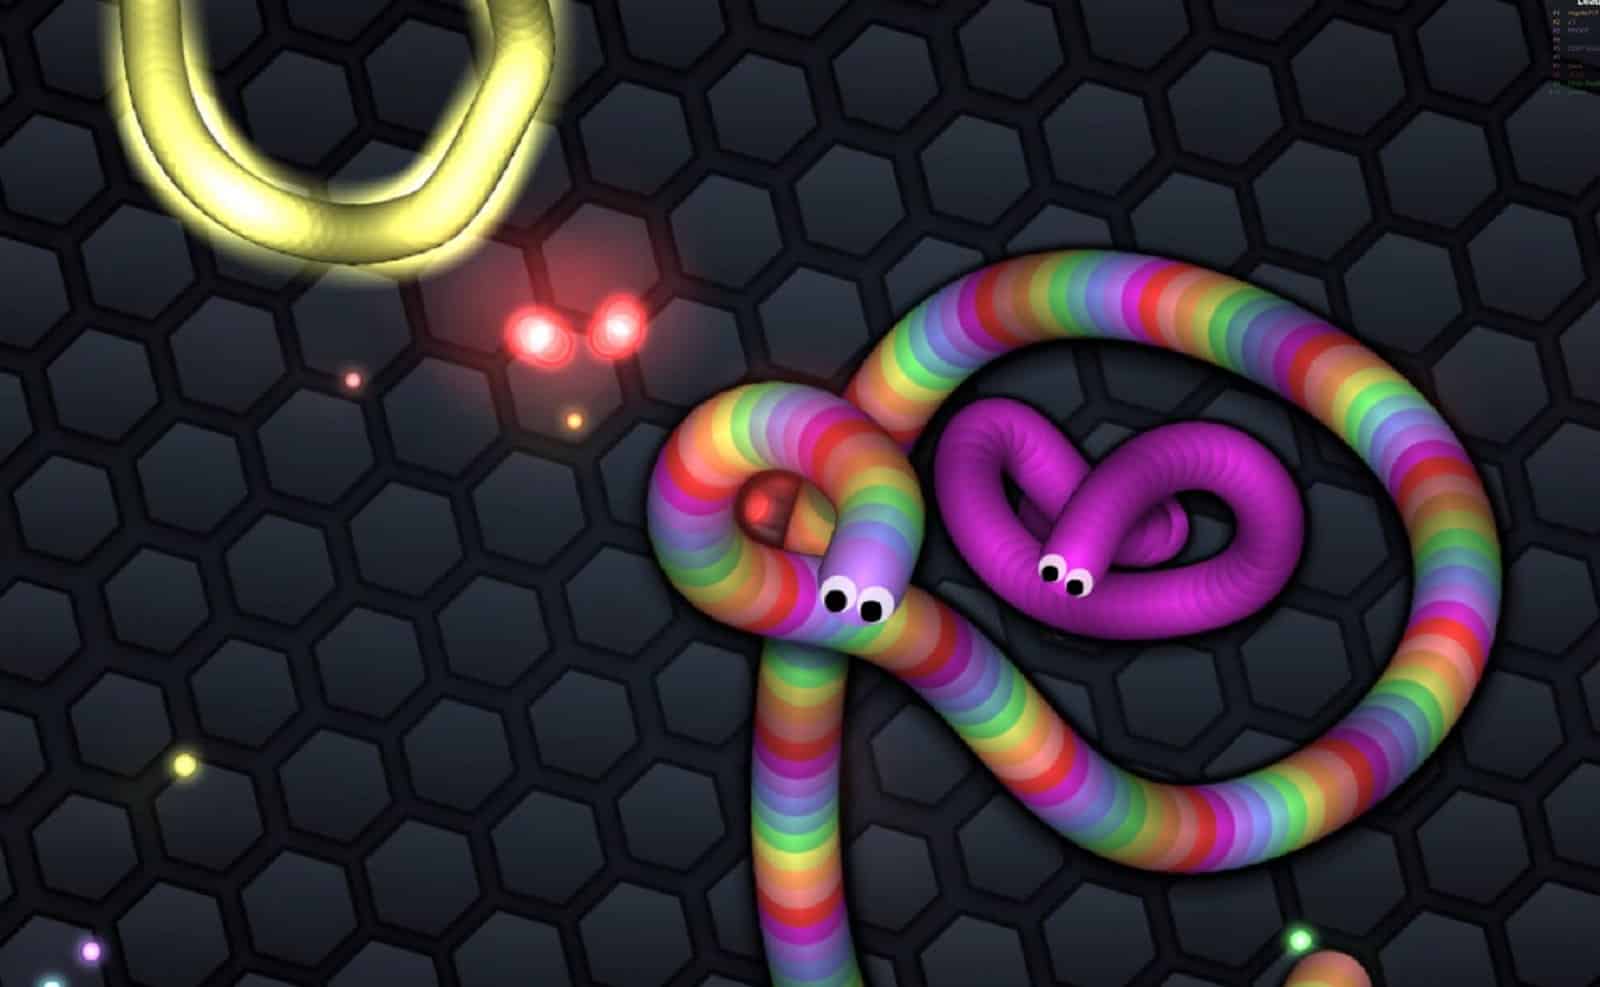 Slither IO codes: Cosmetics, Skins and more [{current_date: M Y}] - Undead  Games